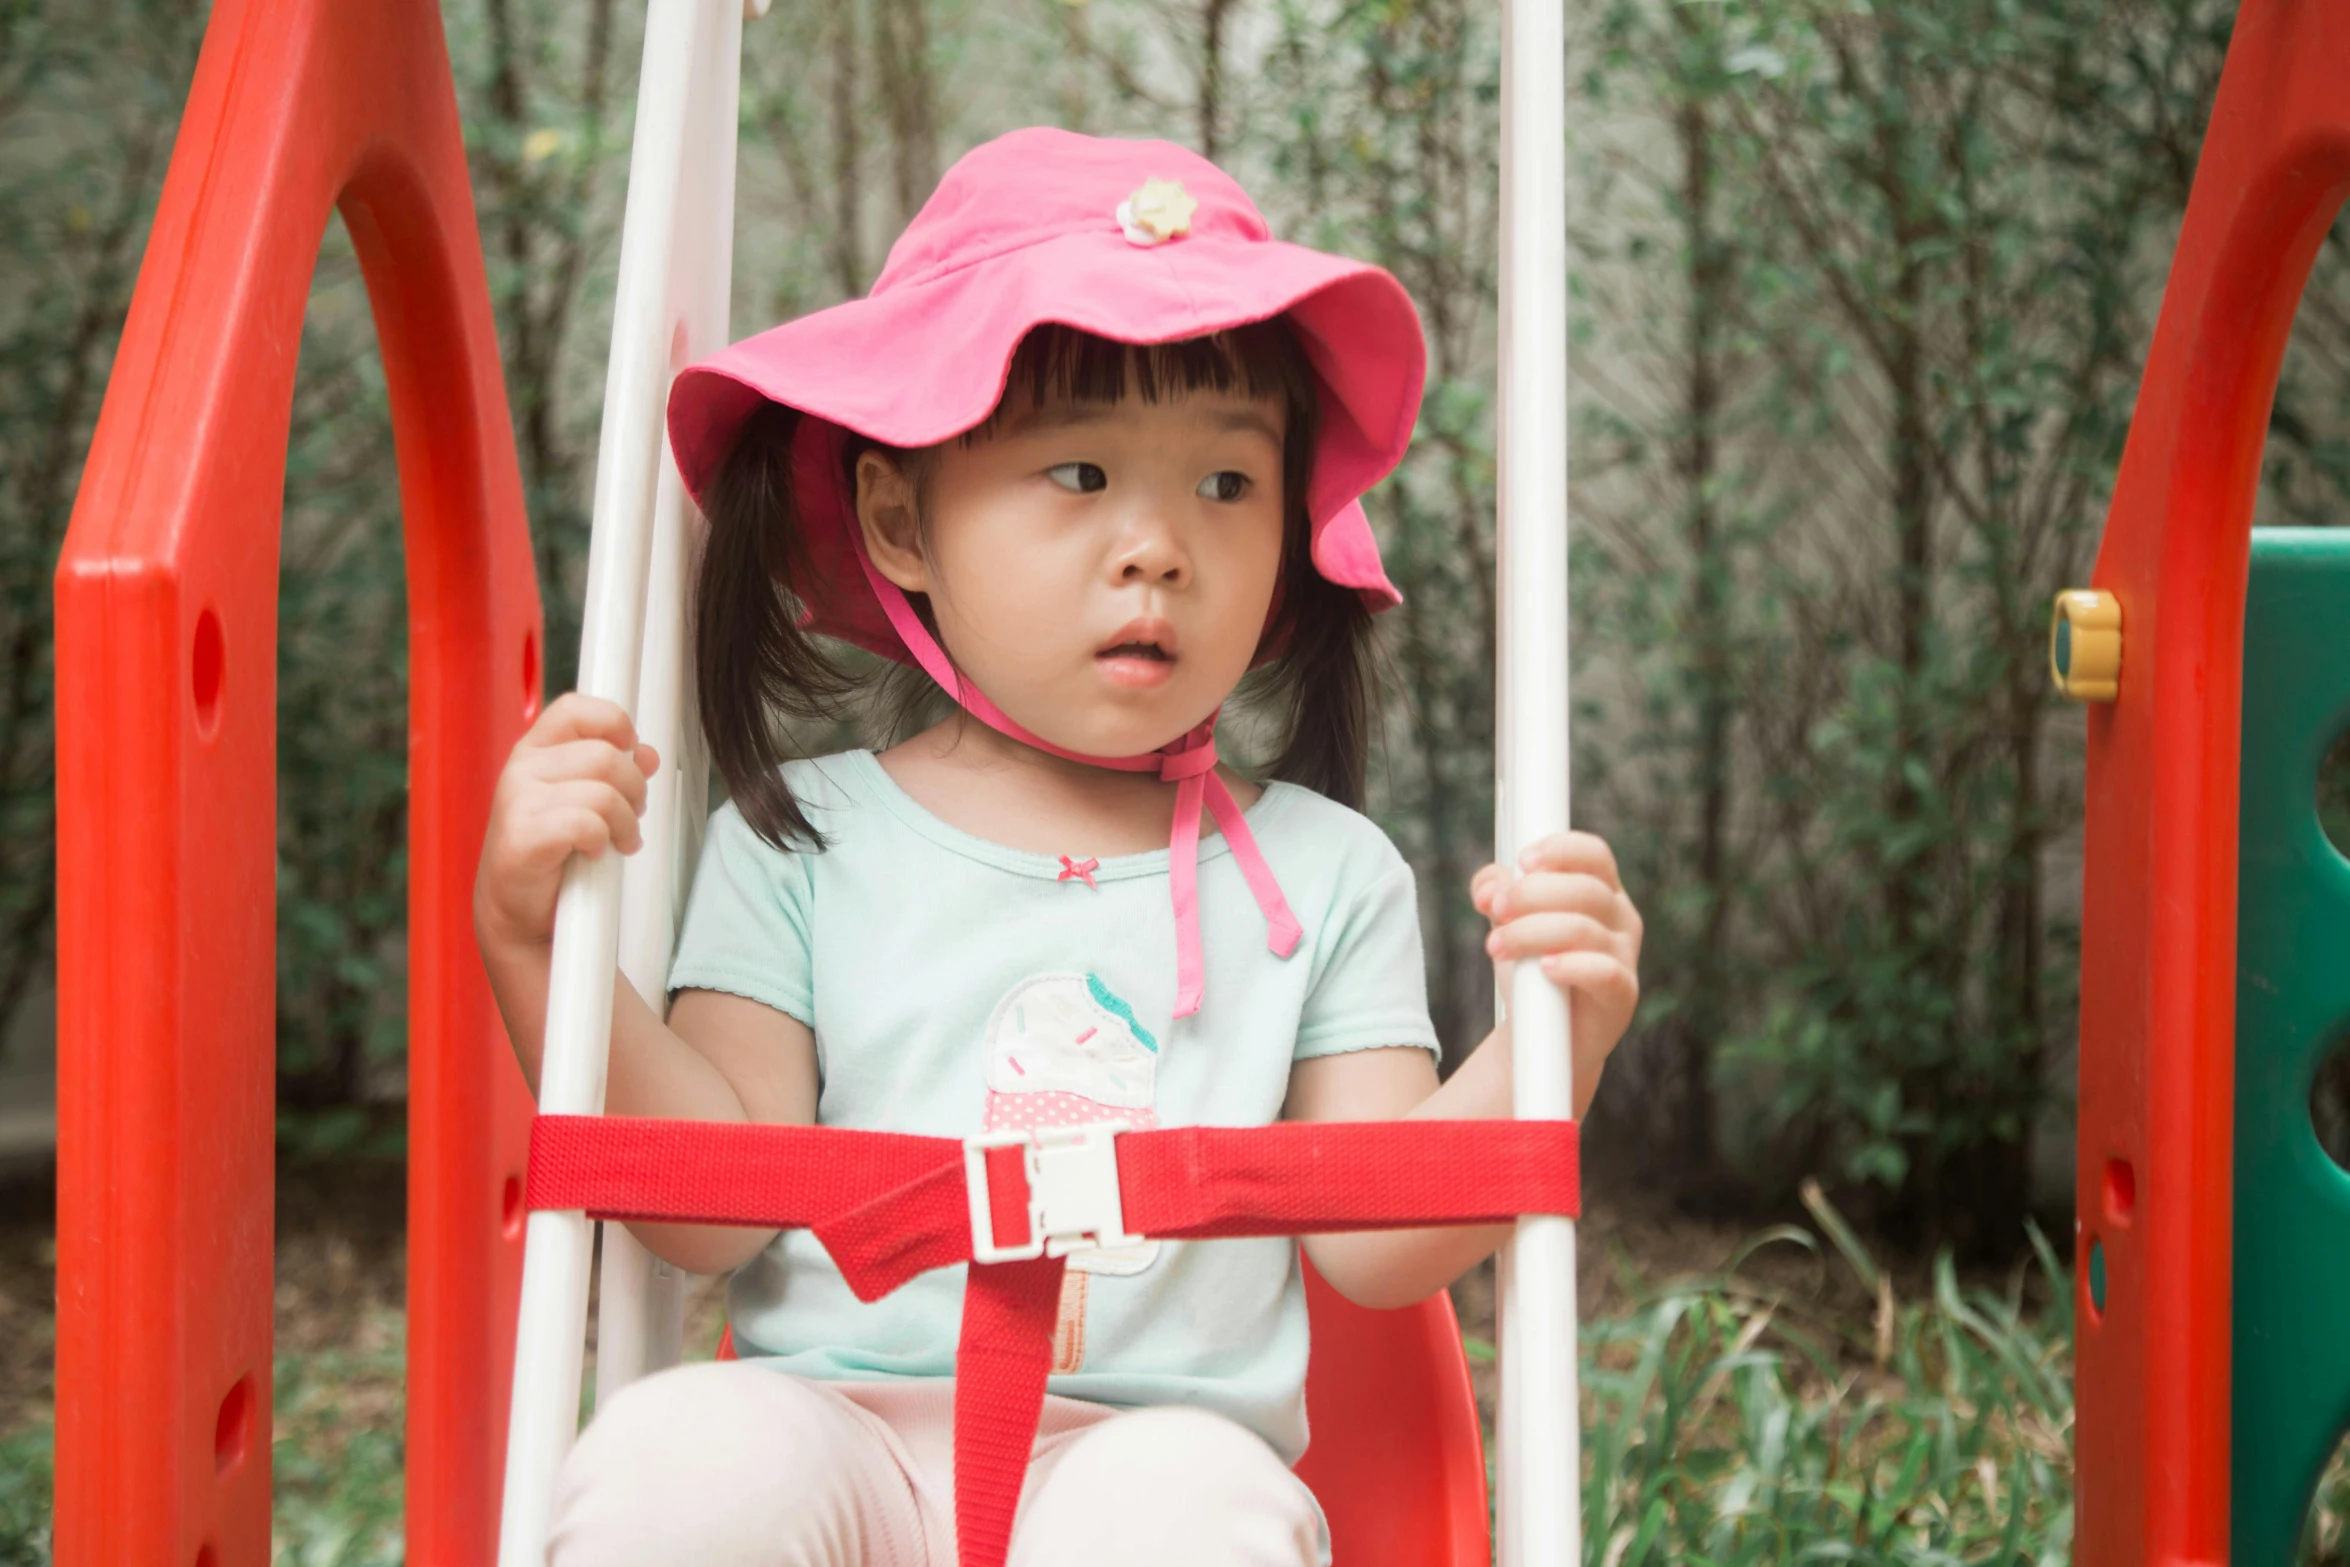 small girl on swing with red and white poles